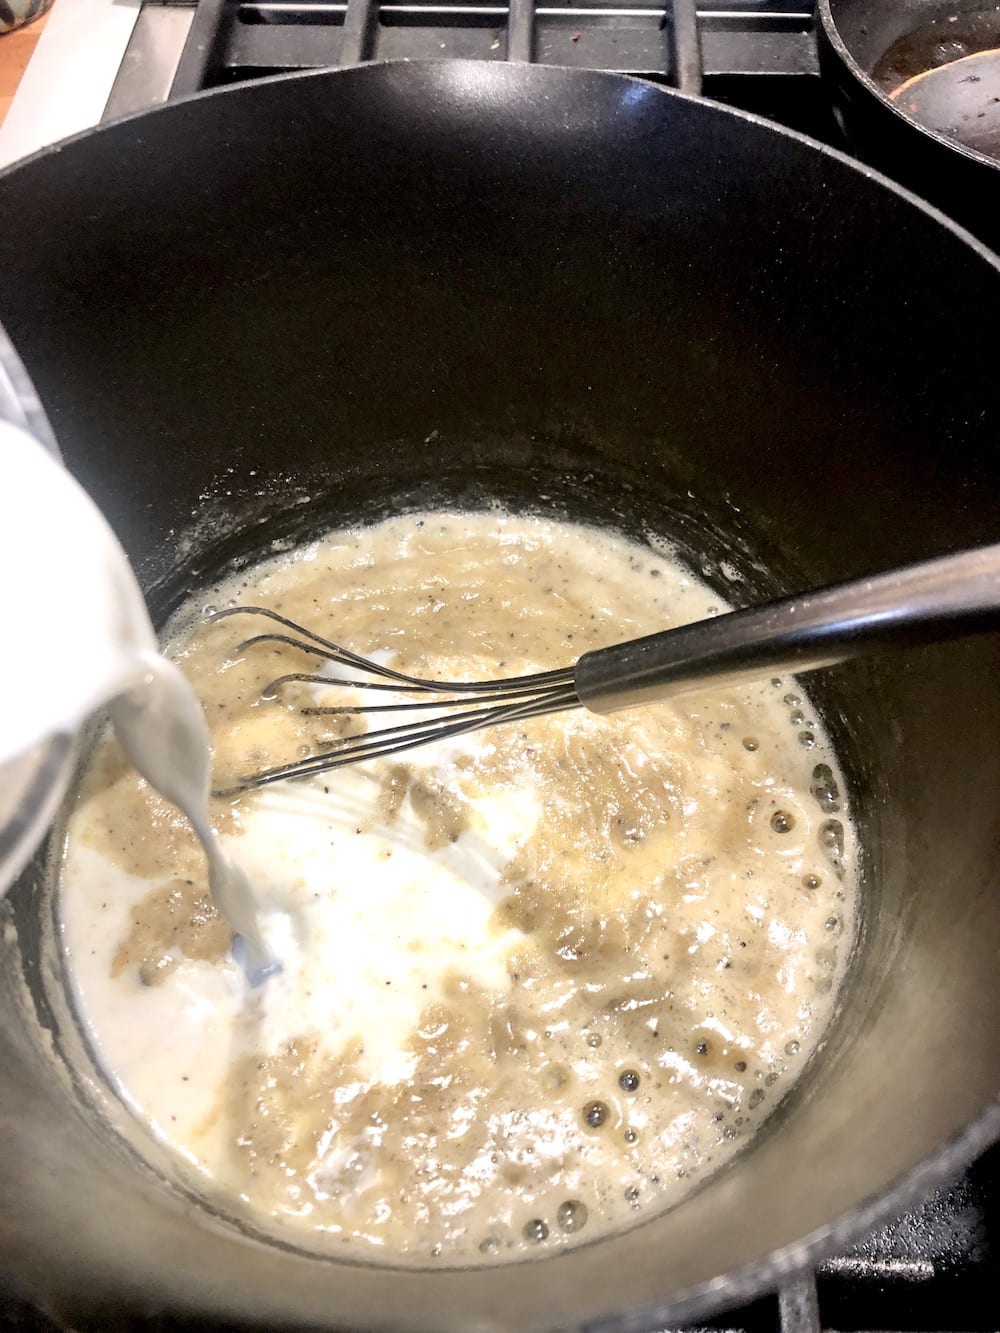 Making mac and cheese sauce - adding milk to a pan